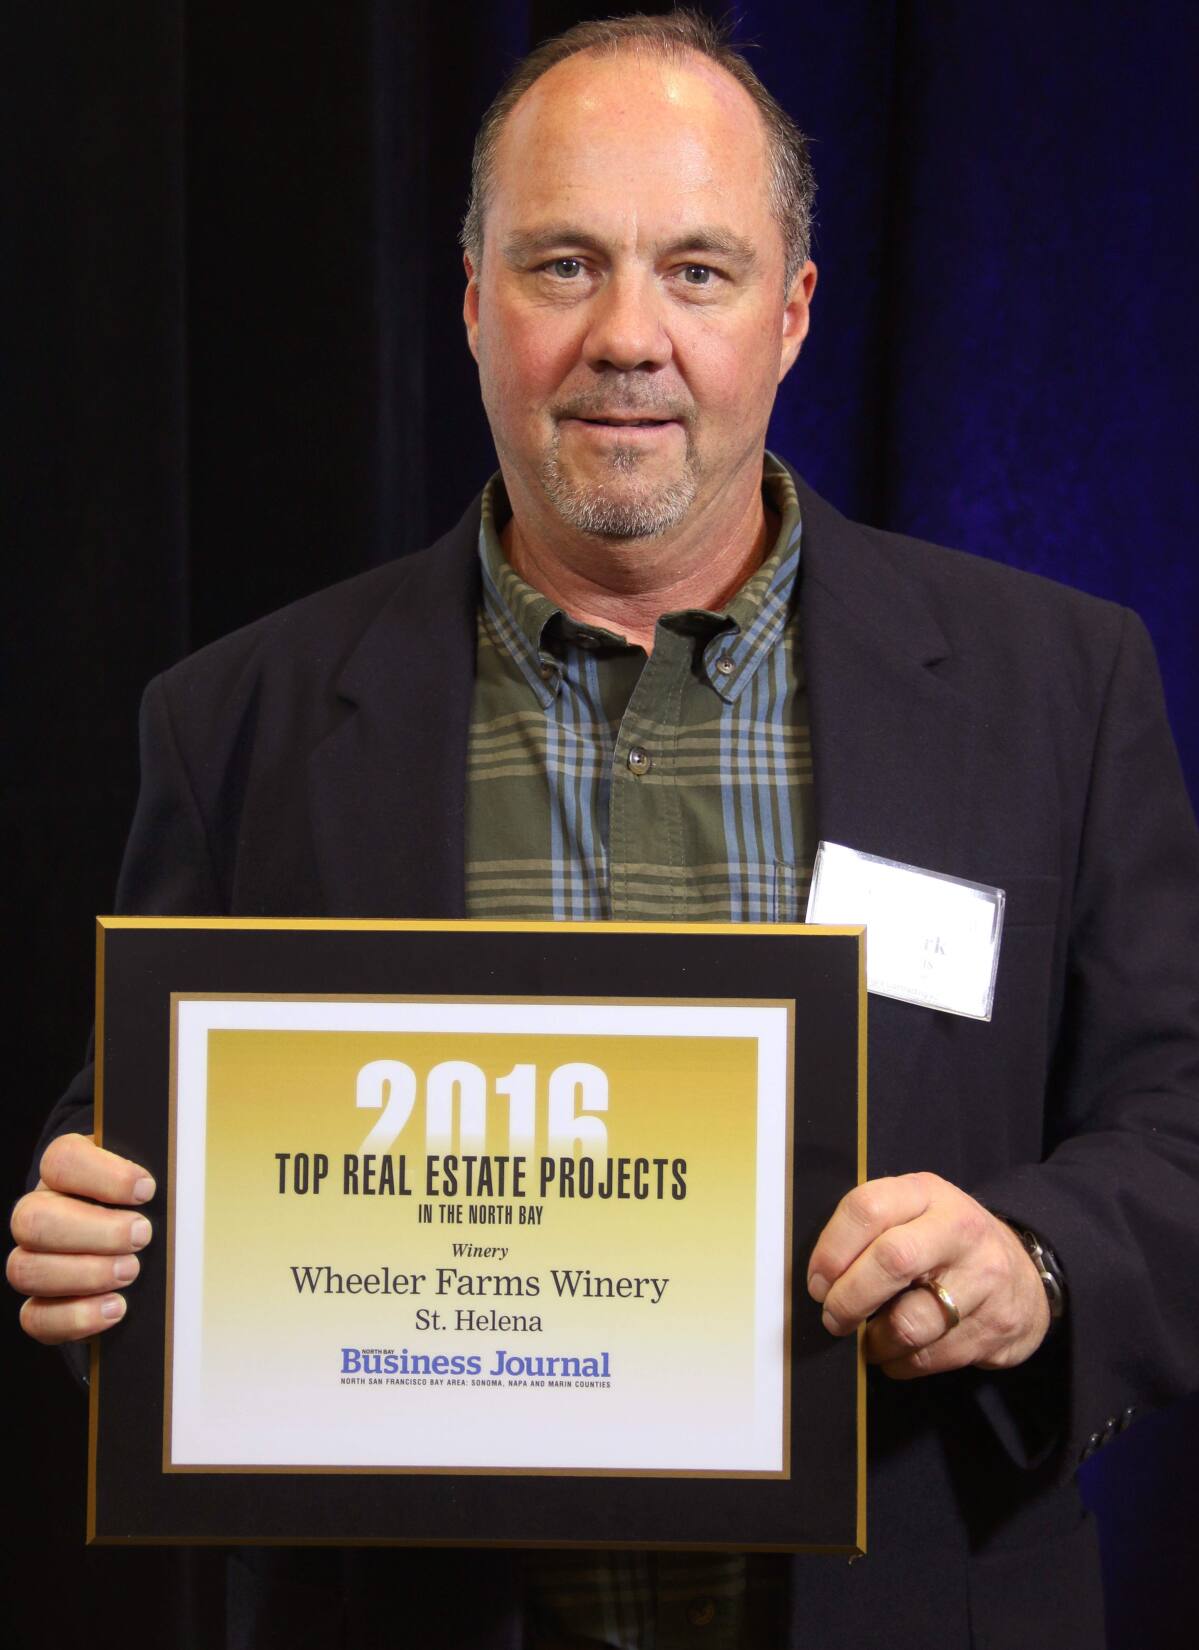 Joseph Phelps Vineyards in St. Helena is a Top Real Estate Project Award  winner